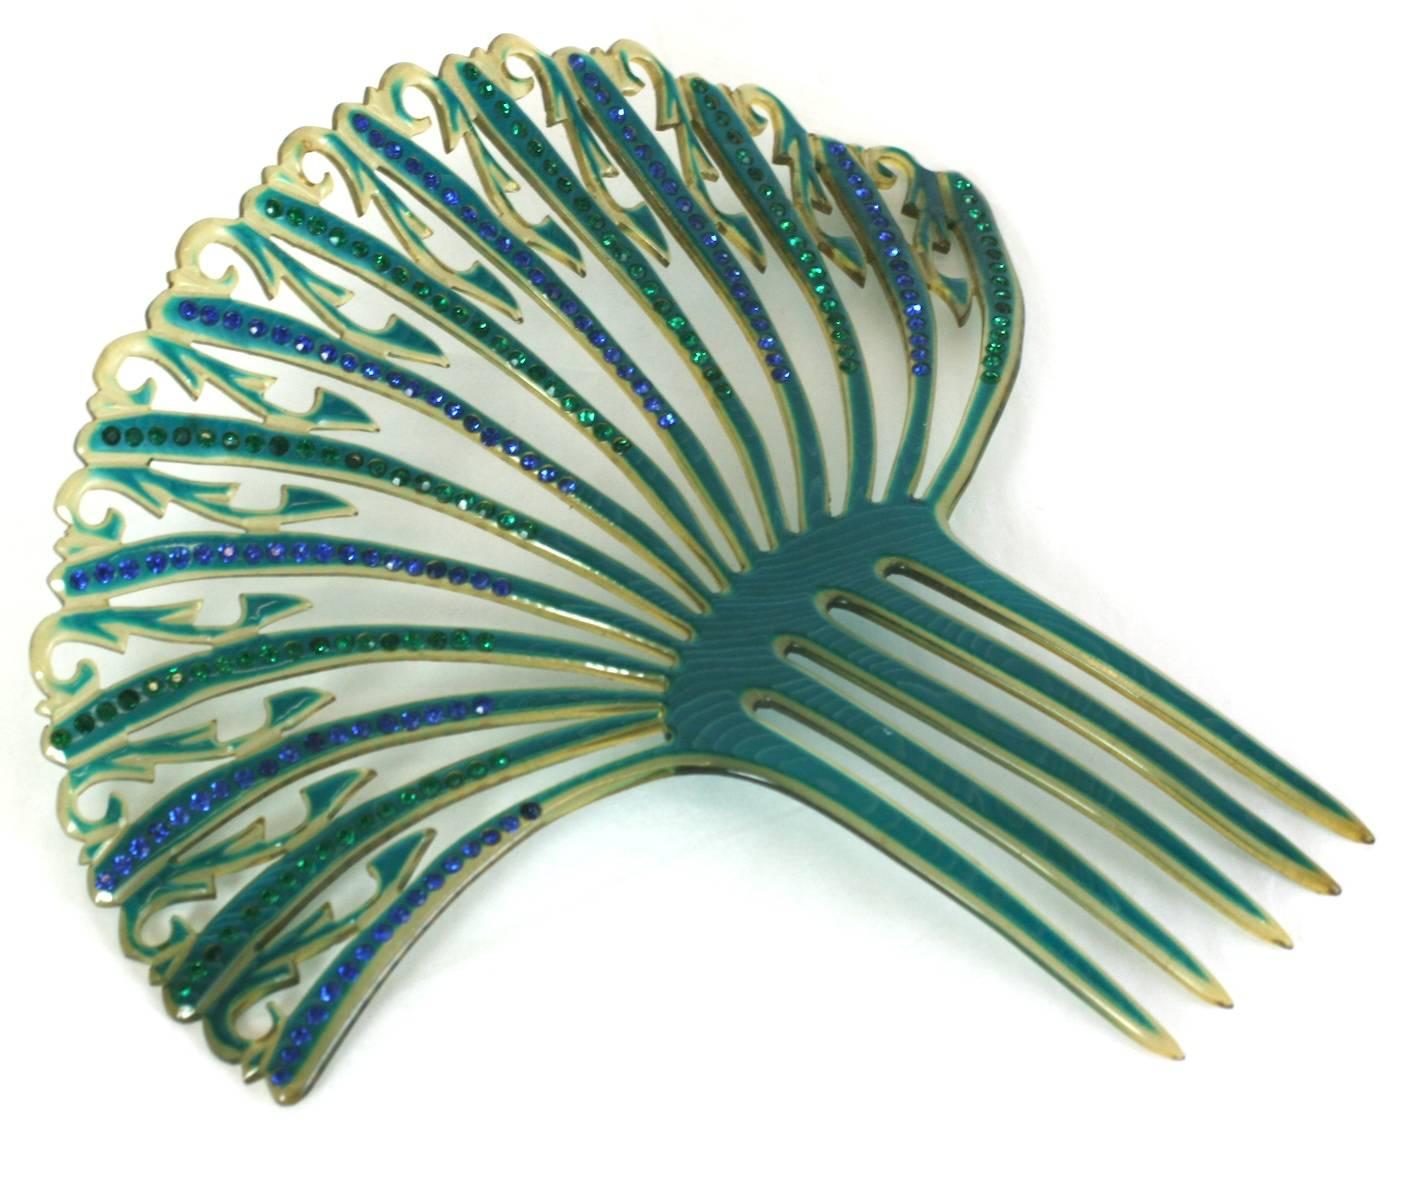 Elaborate Art Deco French openwork celluloid comb with green and blue pastes from the 1930's. Amazing colorations. France 1930's. Excellent condition. 
7.5